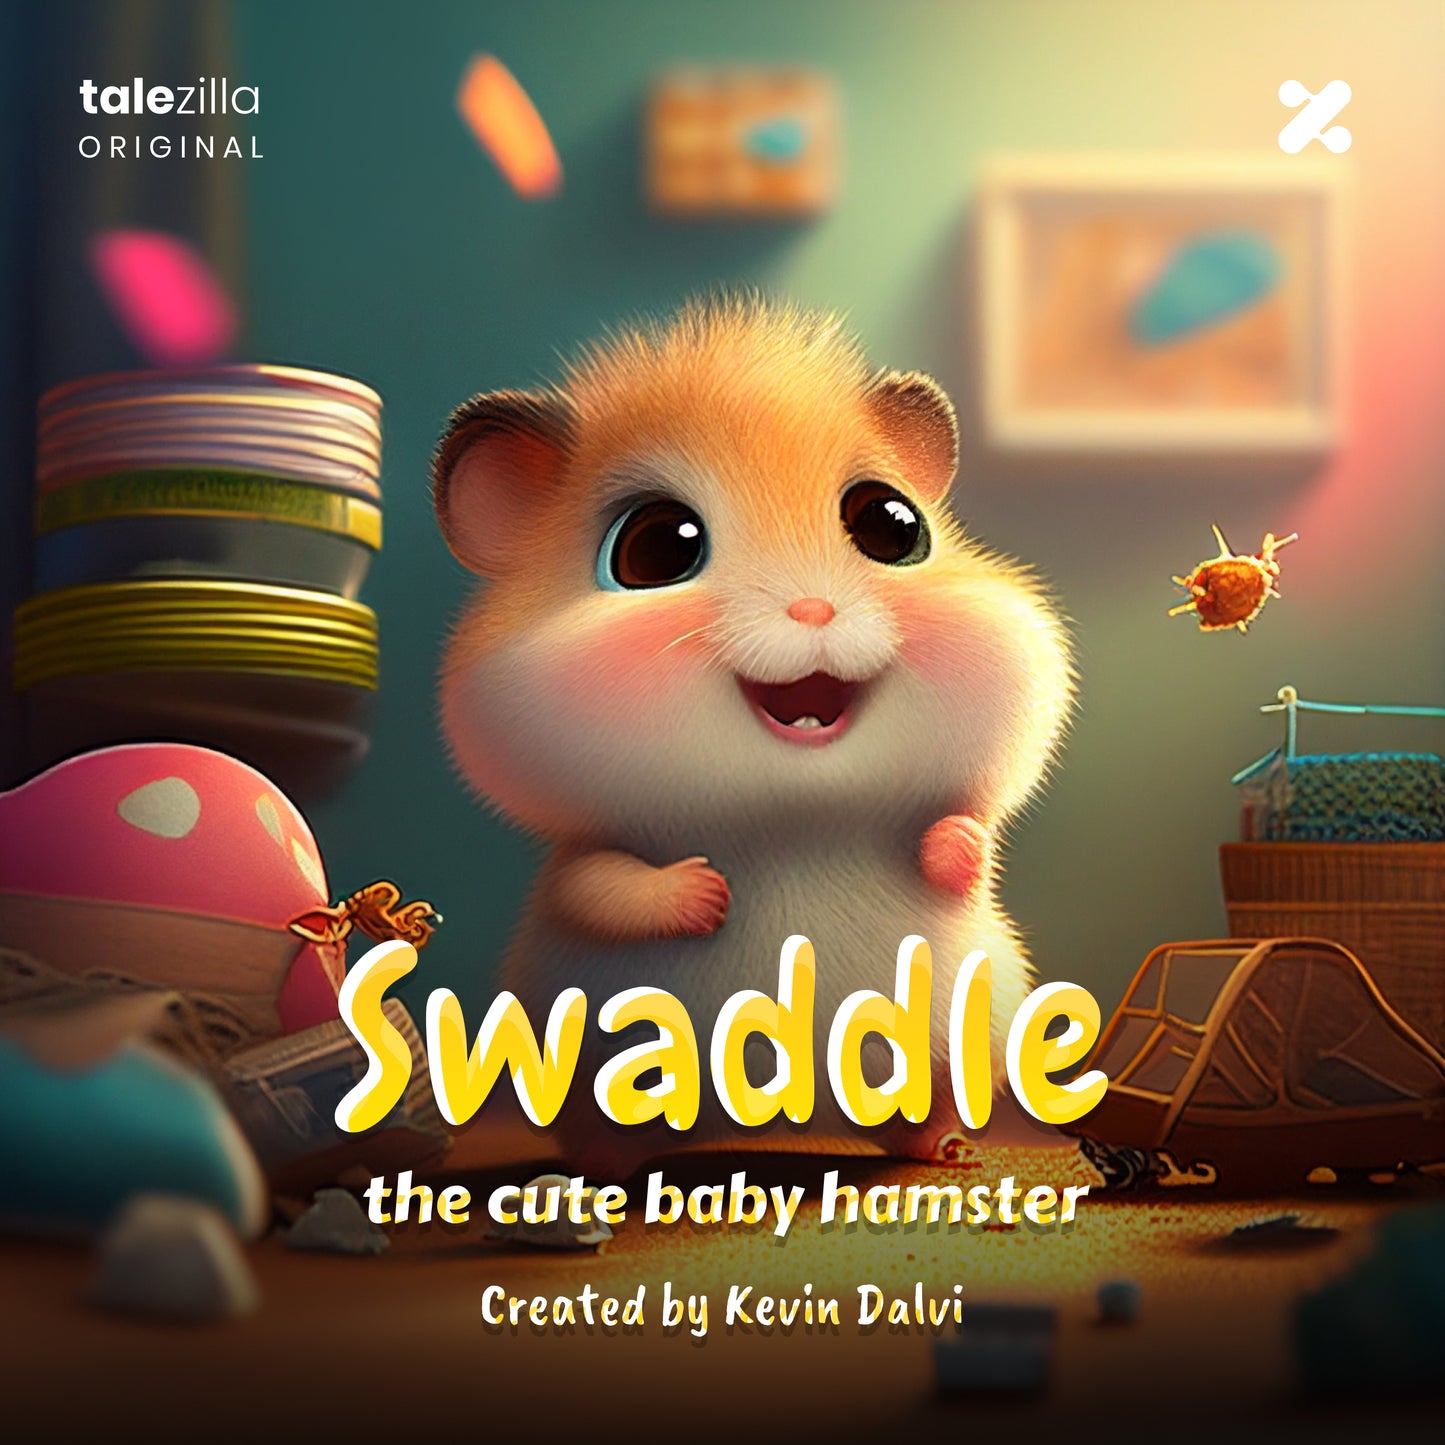 Swaddle: The Cute Baby Hamster